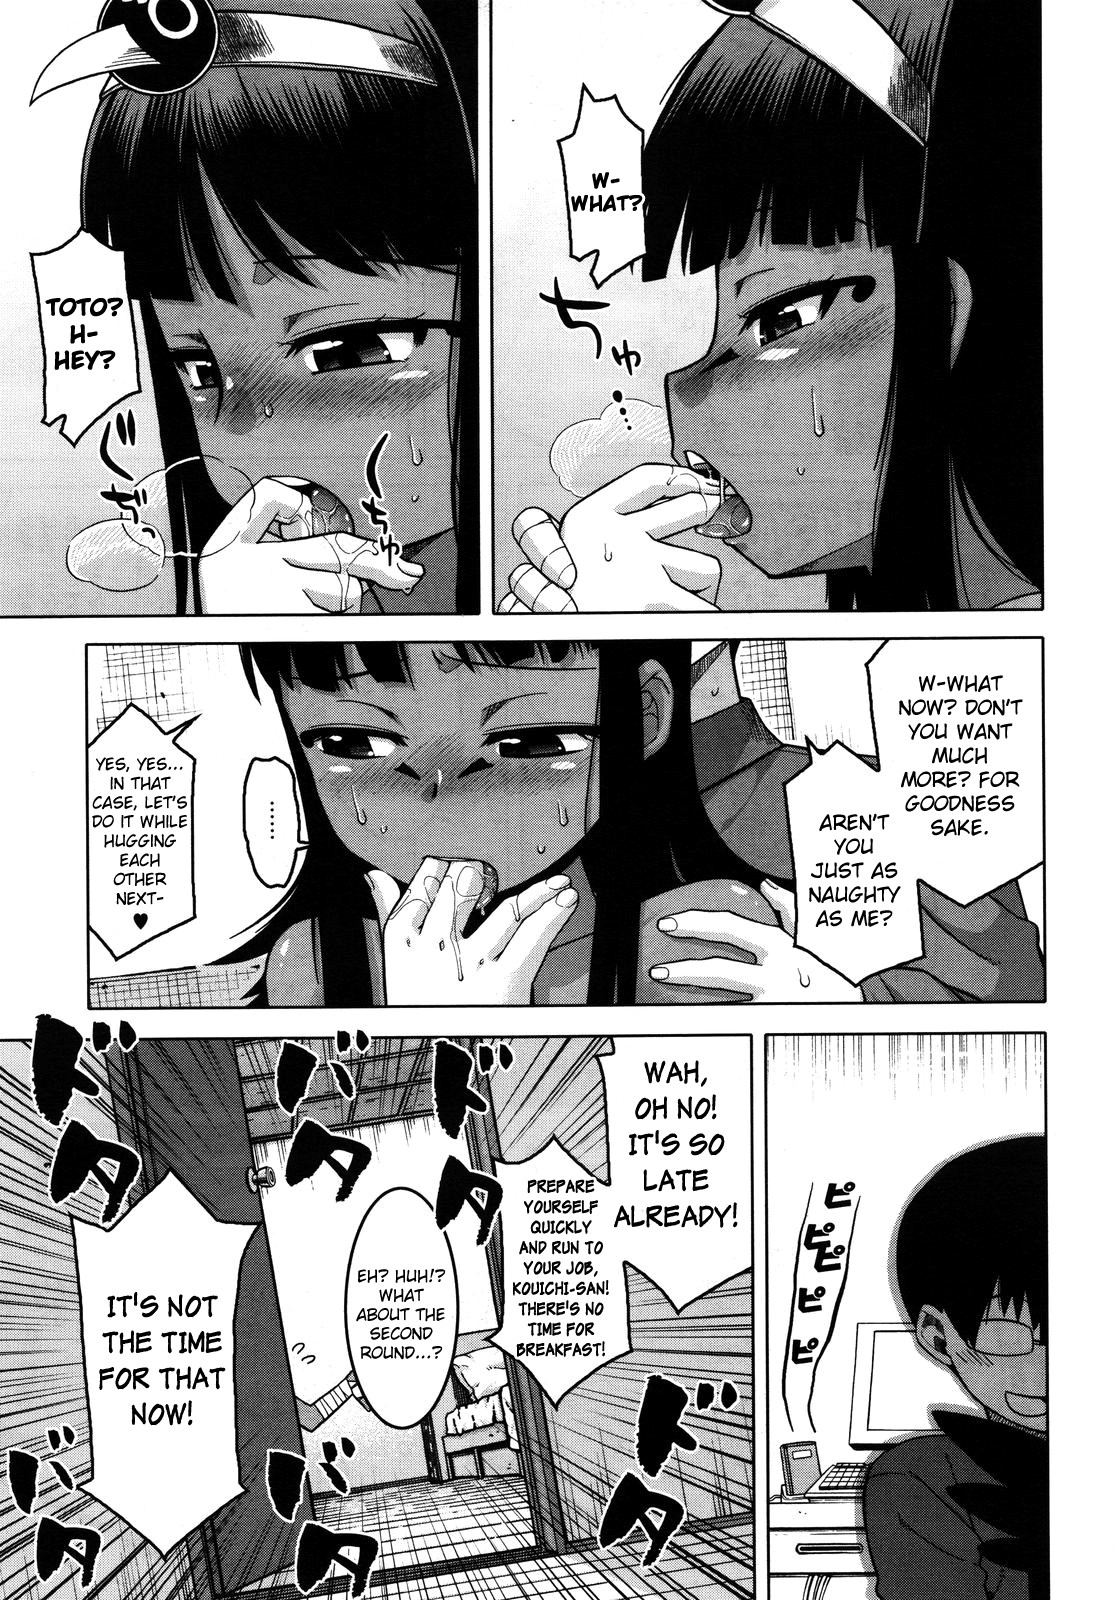 [Takatu] You're Gonna Write that Down in History Too!? Ch. 1-2 (English) {doujin-moe.us} page 9 full